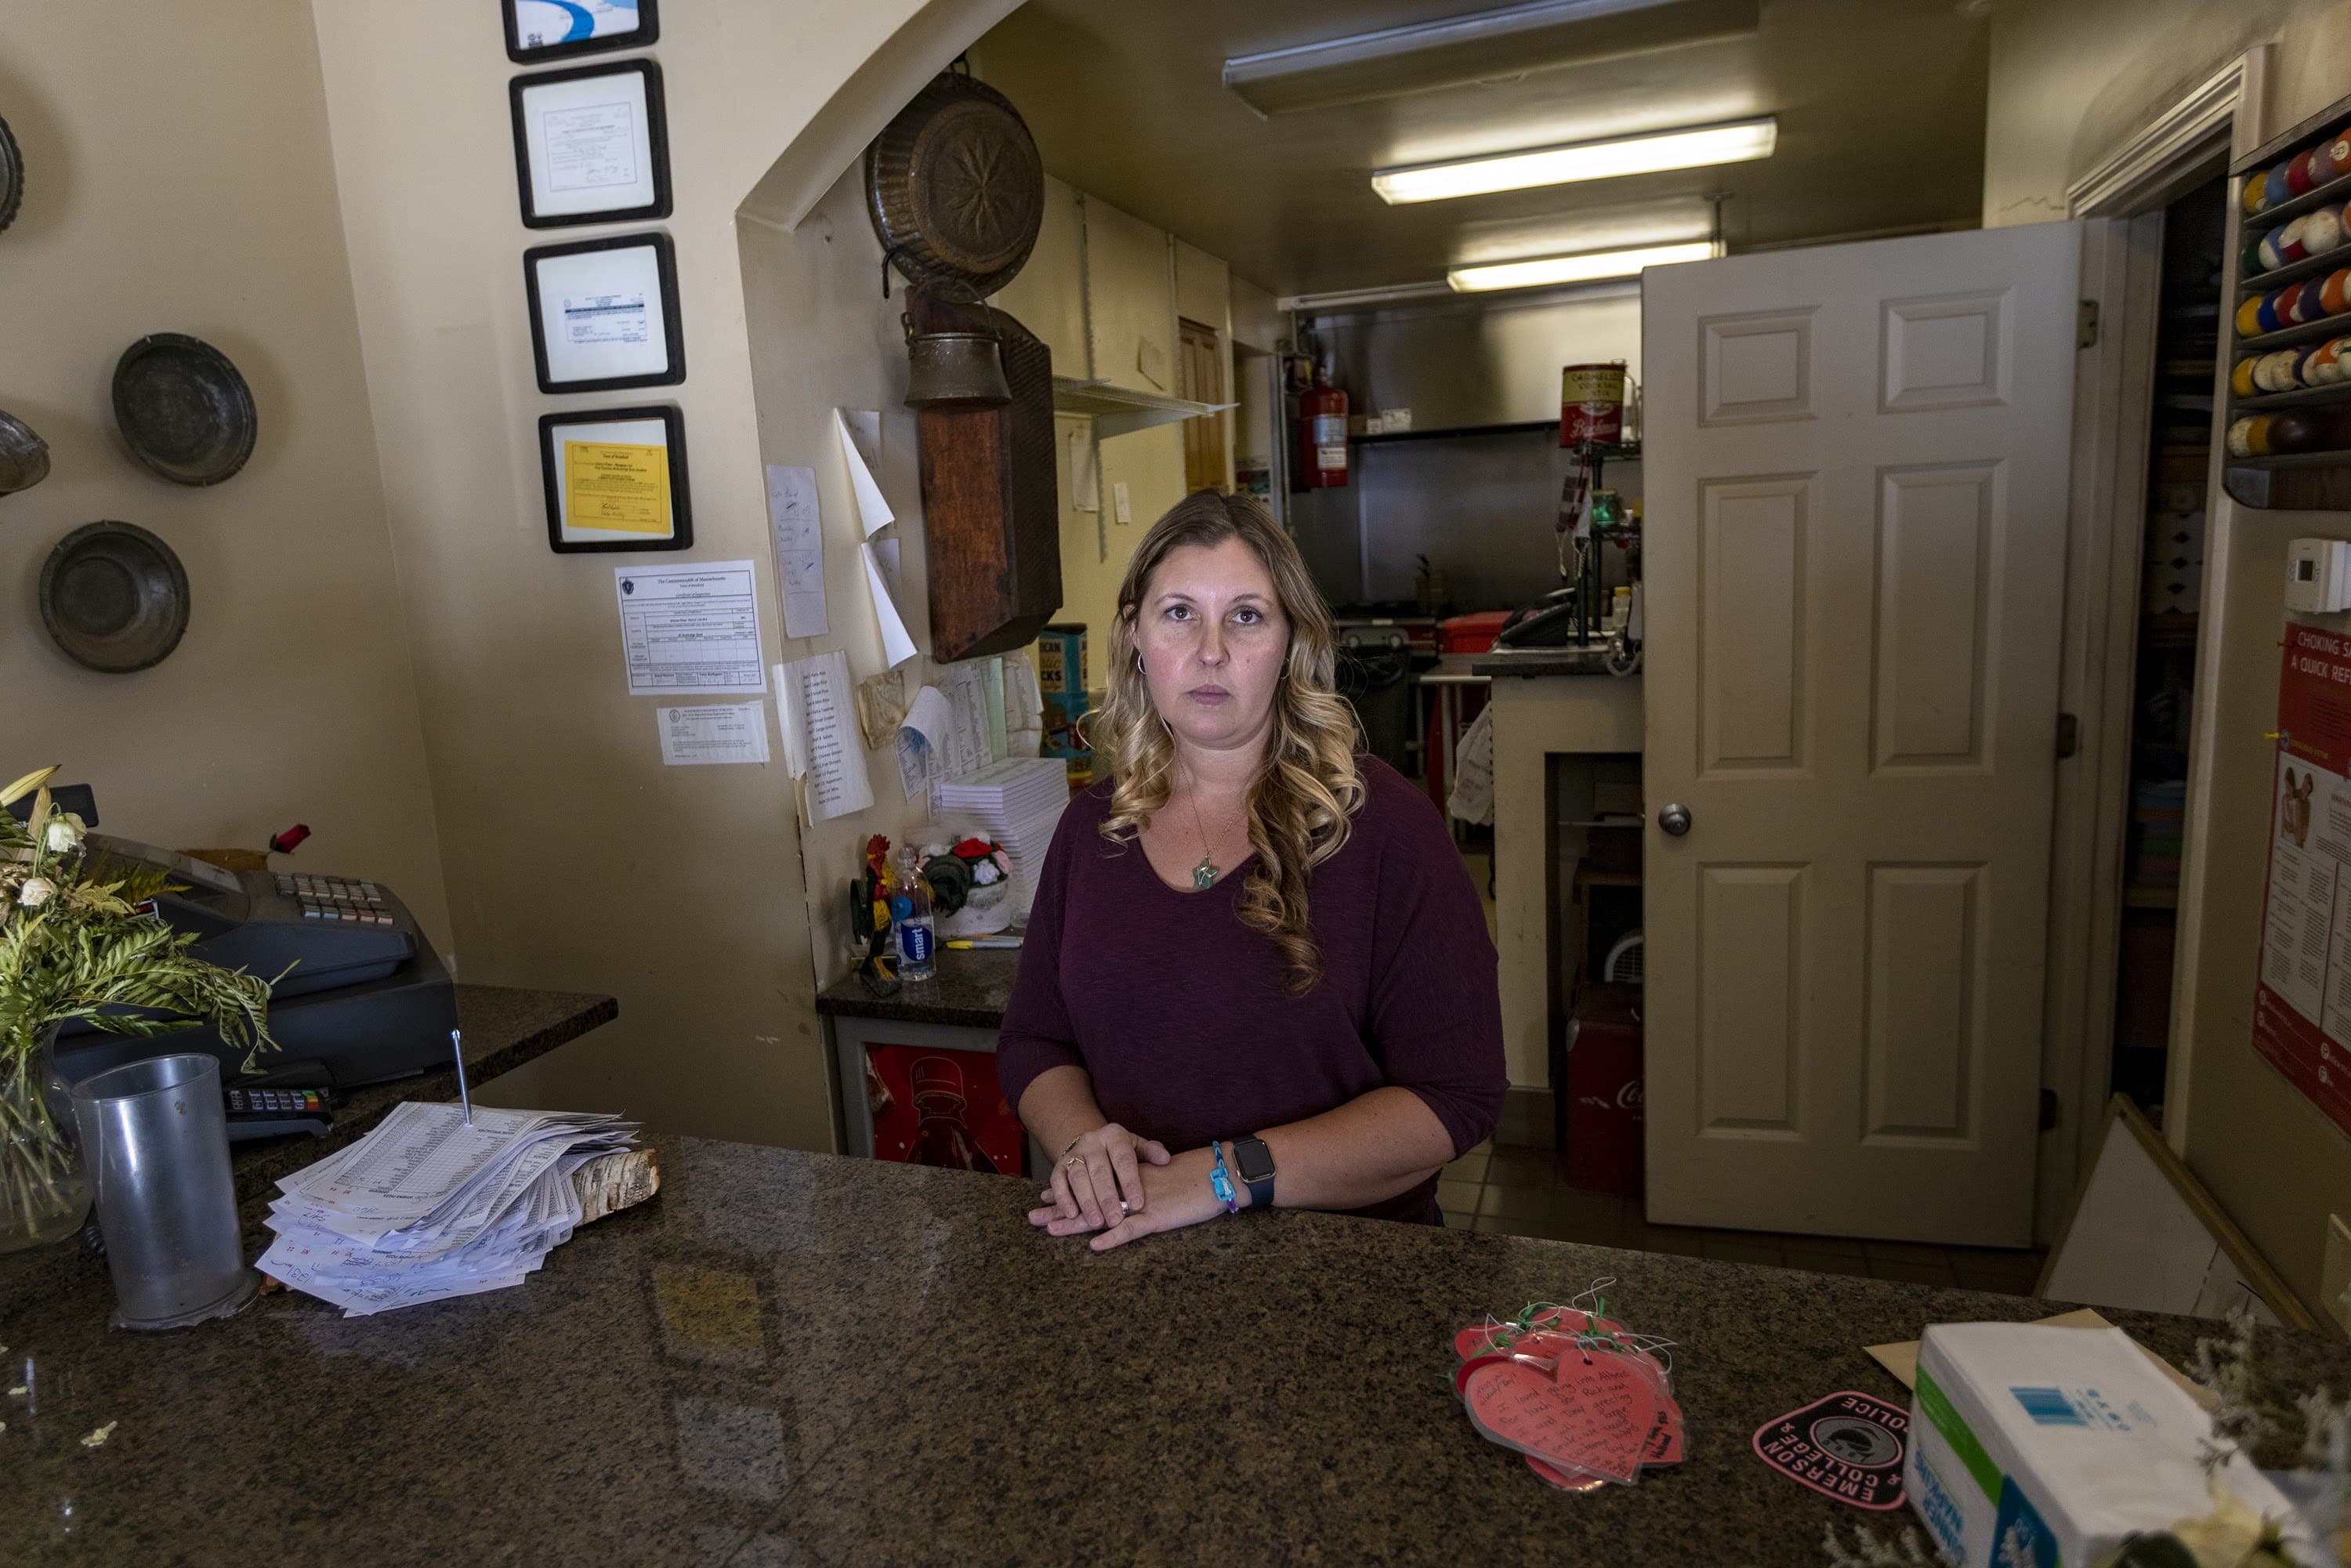 Rona Tsantinis-Roy stands behind the counter at Athens Pizza, a pizza shop in Brimfield her father owned for many years. Tsantinis-Roy‘s father Tony Tsantinis died of COVID-19 last month, when efforts to find space at a hospital that could offer him a higher level of care to treat him could not be found. (Jesse Costa/WBUR)